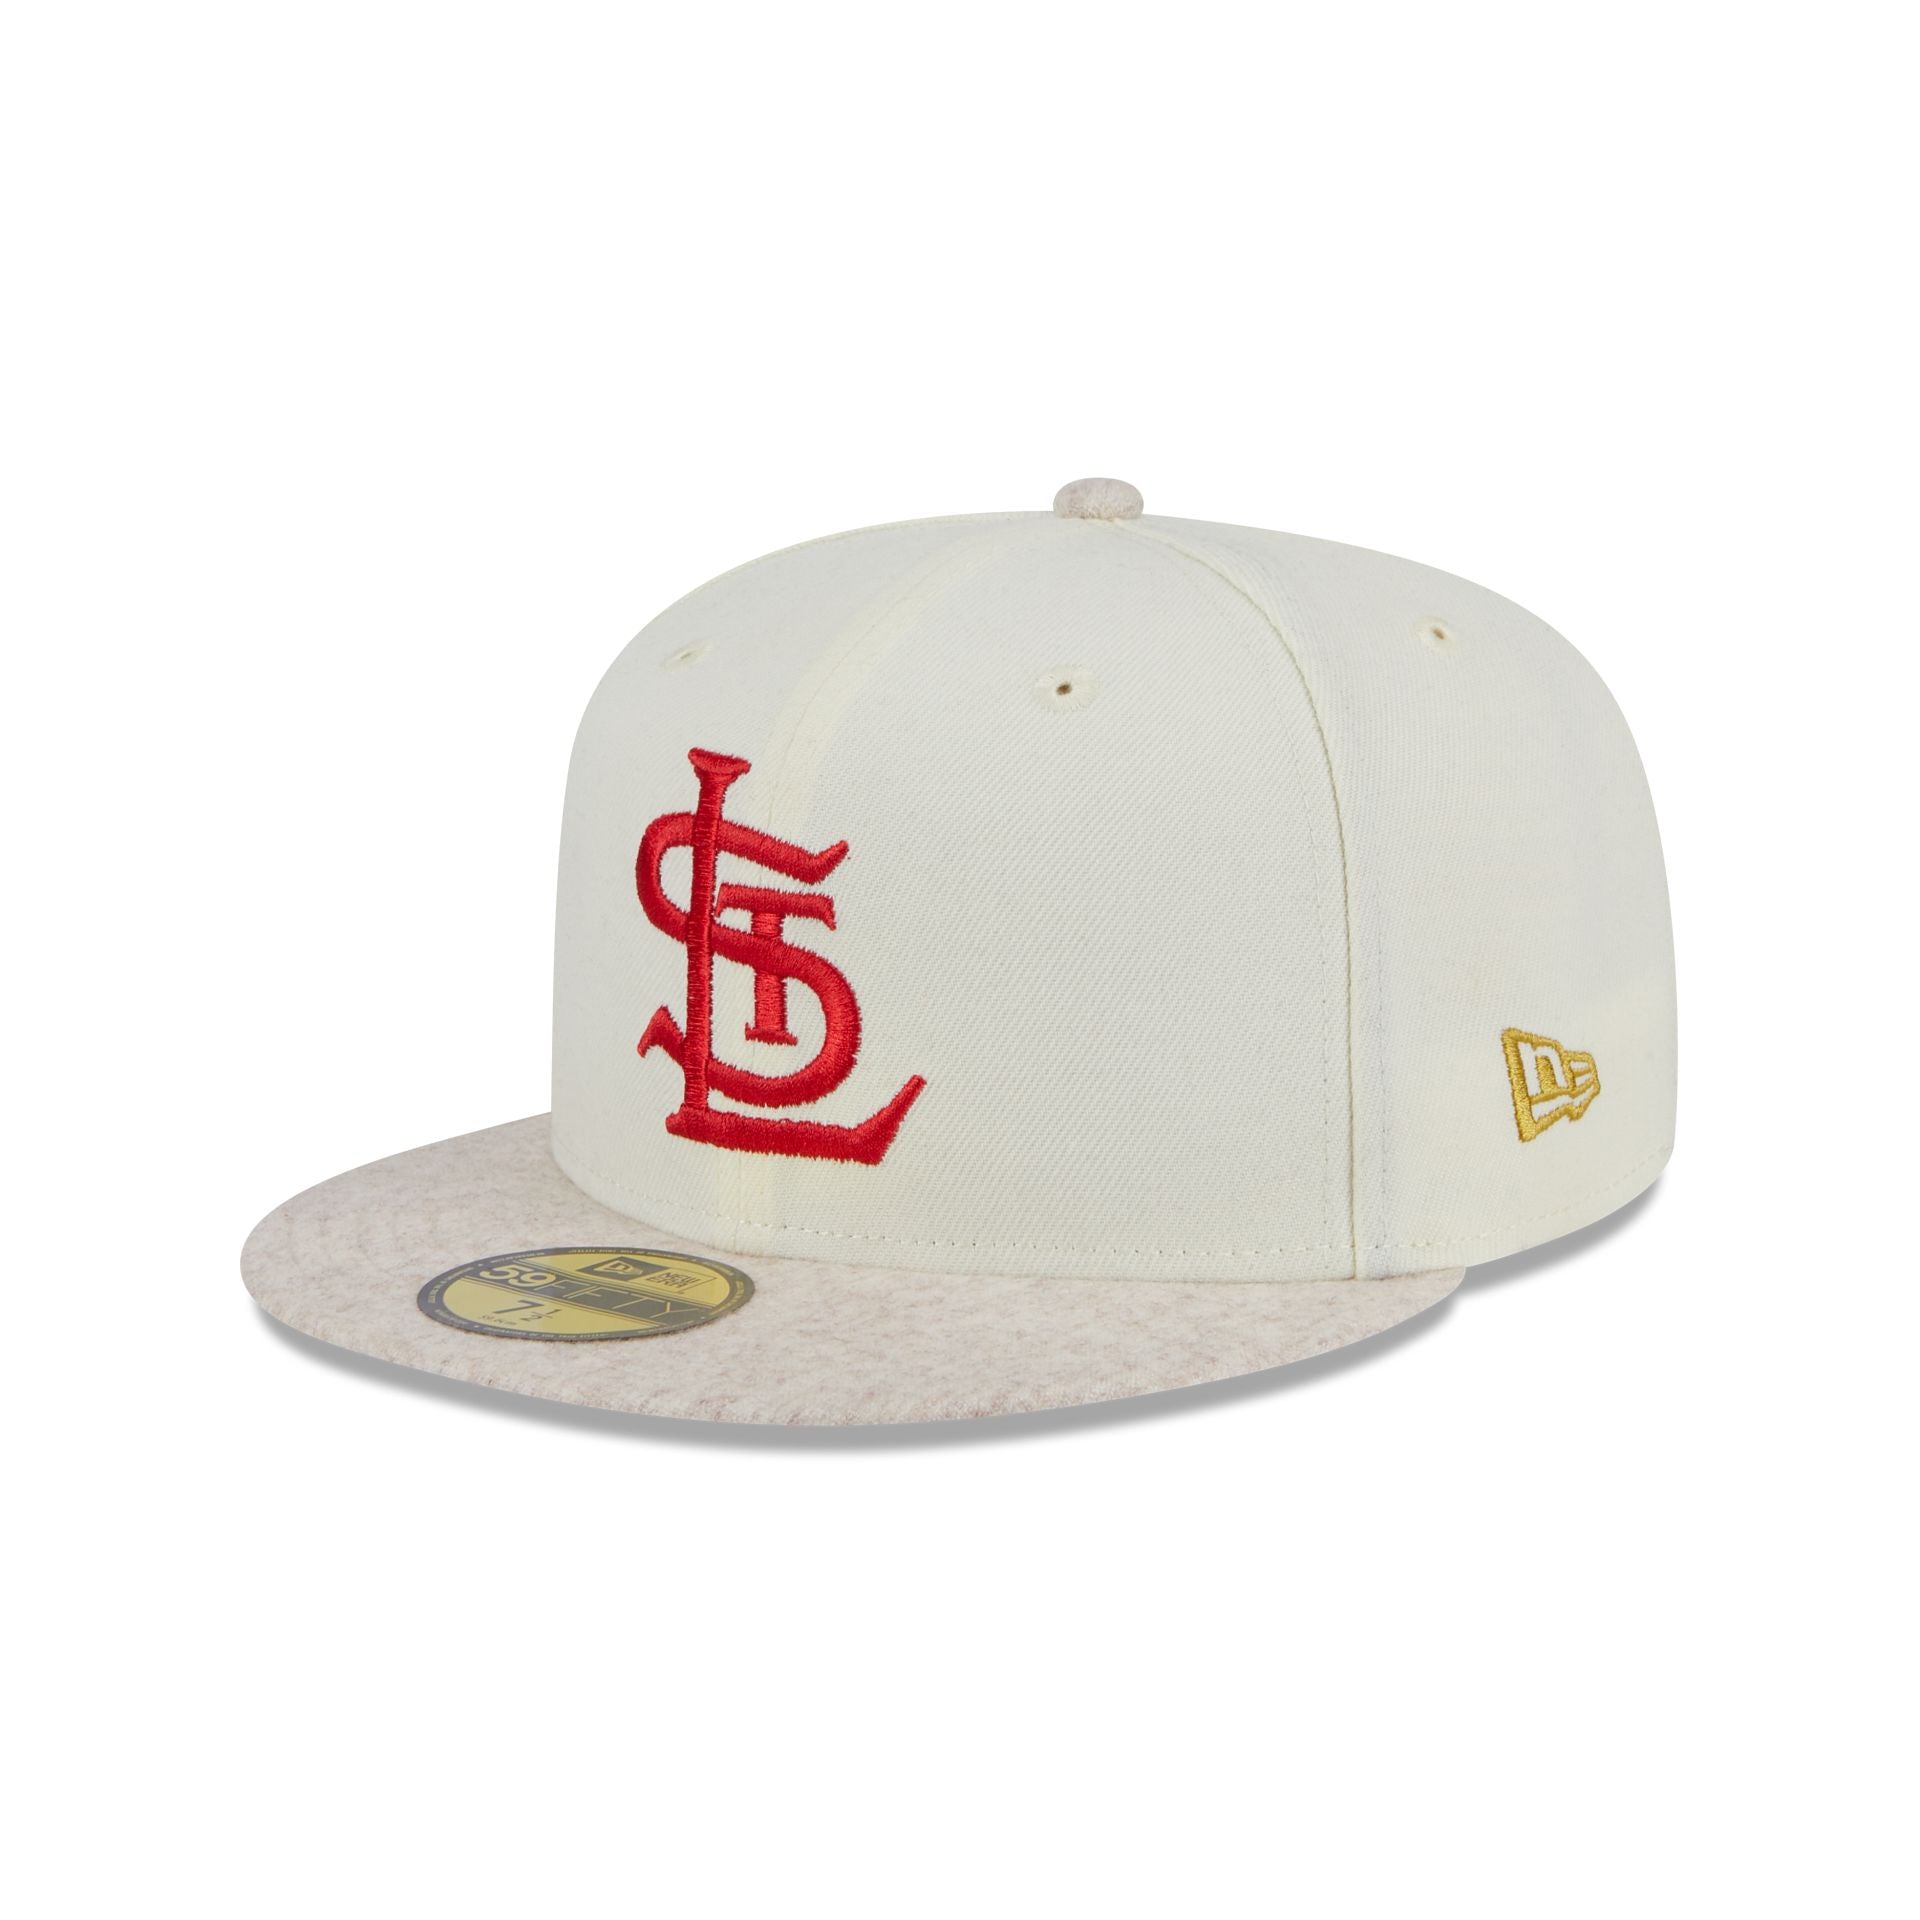 St. Louis Cardinals The League Red Adjustable - New Era